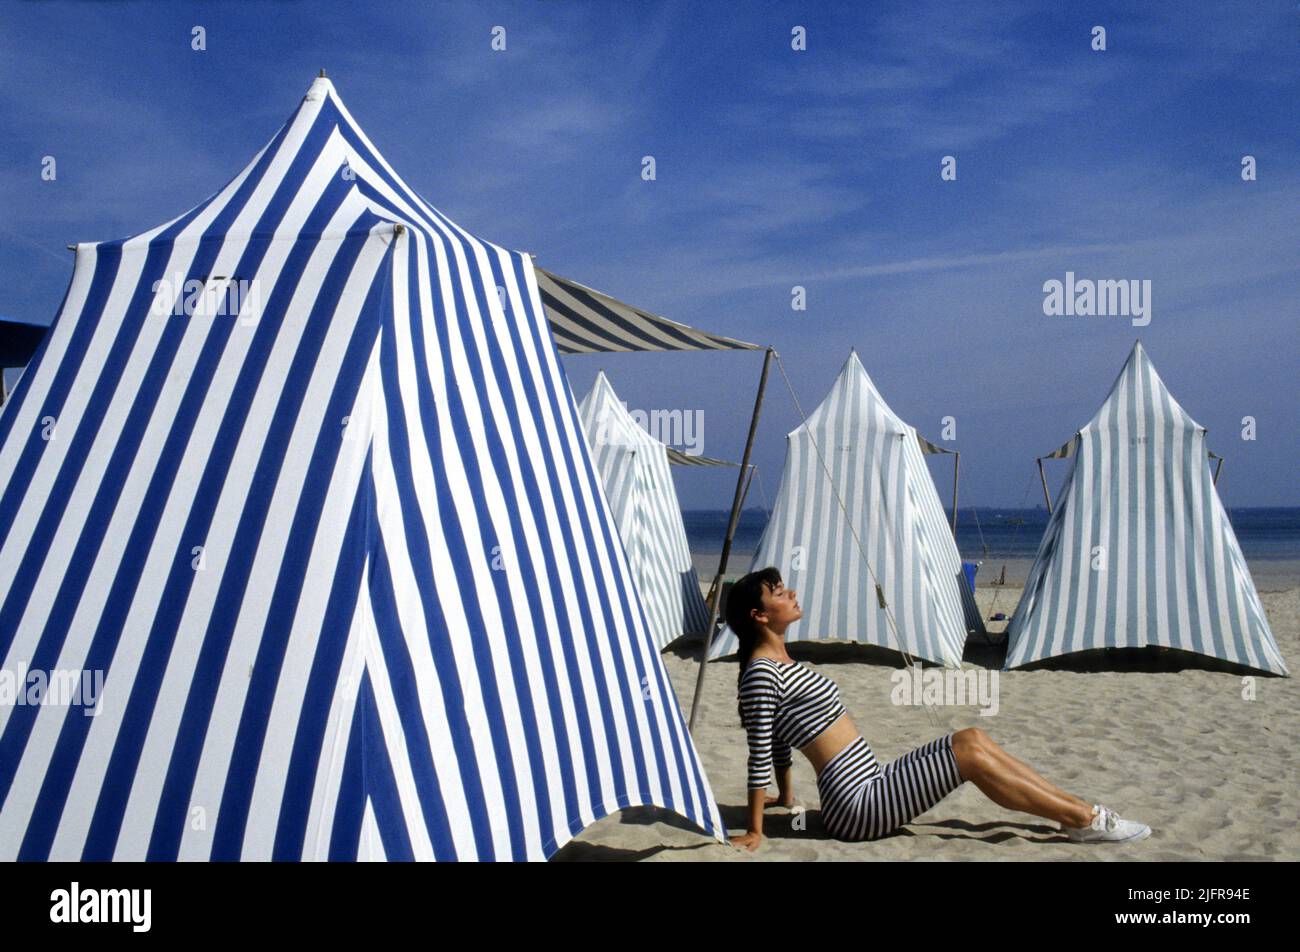 pretty dark hair young woman sit on the beach with old blue ray bathin suit a side of blue ray summer tent graphic image fashion style Stock Photo